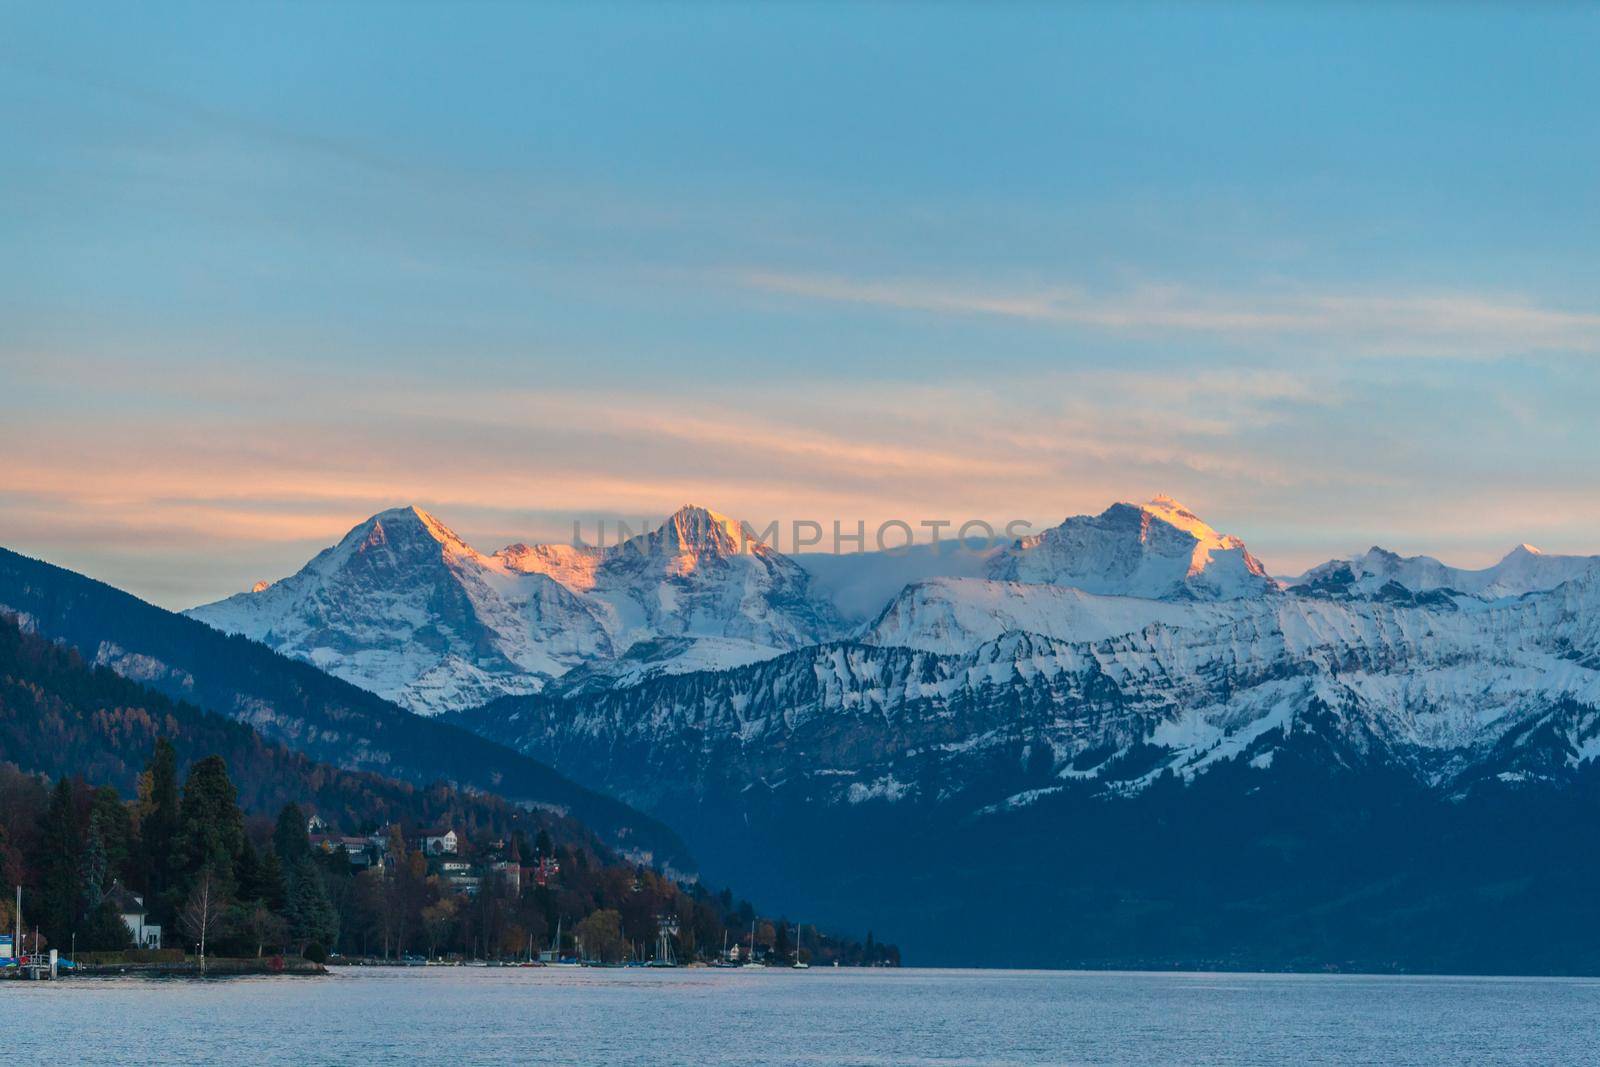 Stuuning view of Eiger North Face and Monch, jungfrau in sunset from the lake side of the Thun lake, Canton of Bern, Switzerland